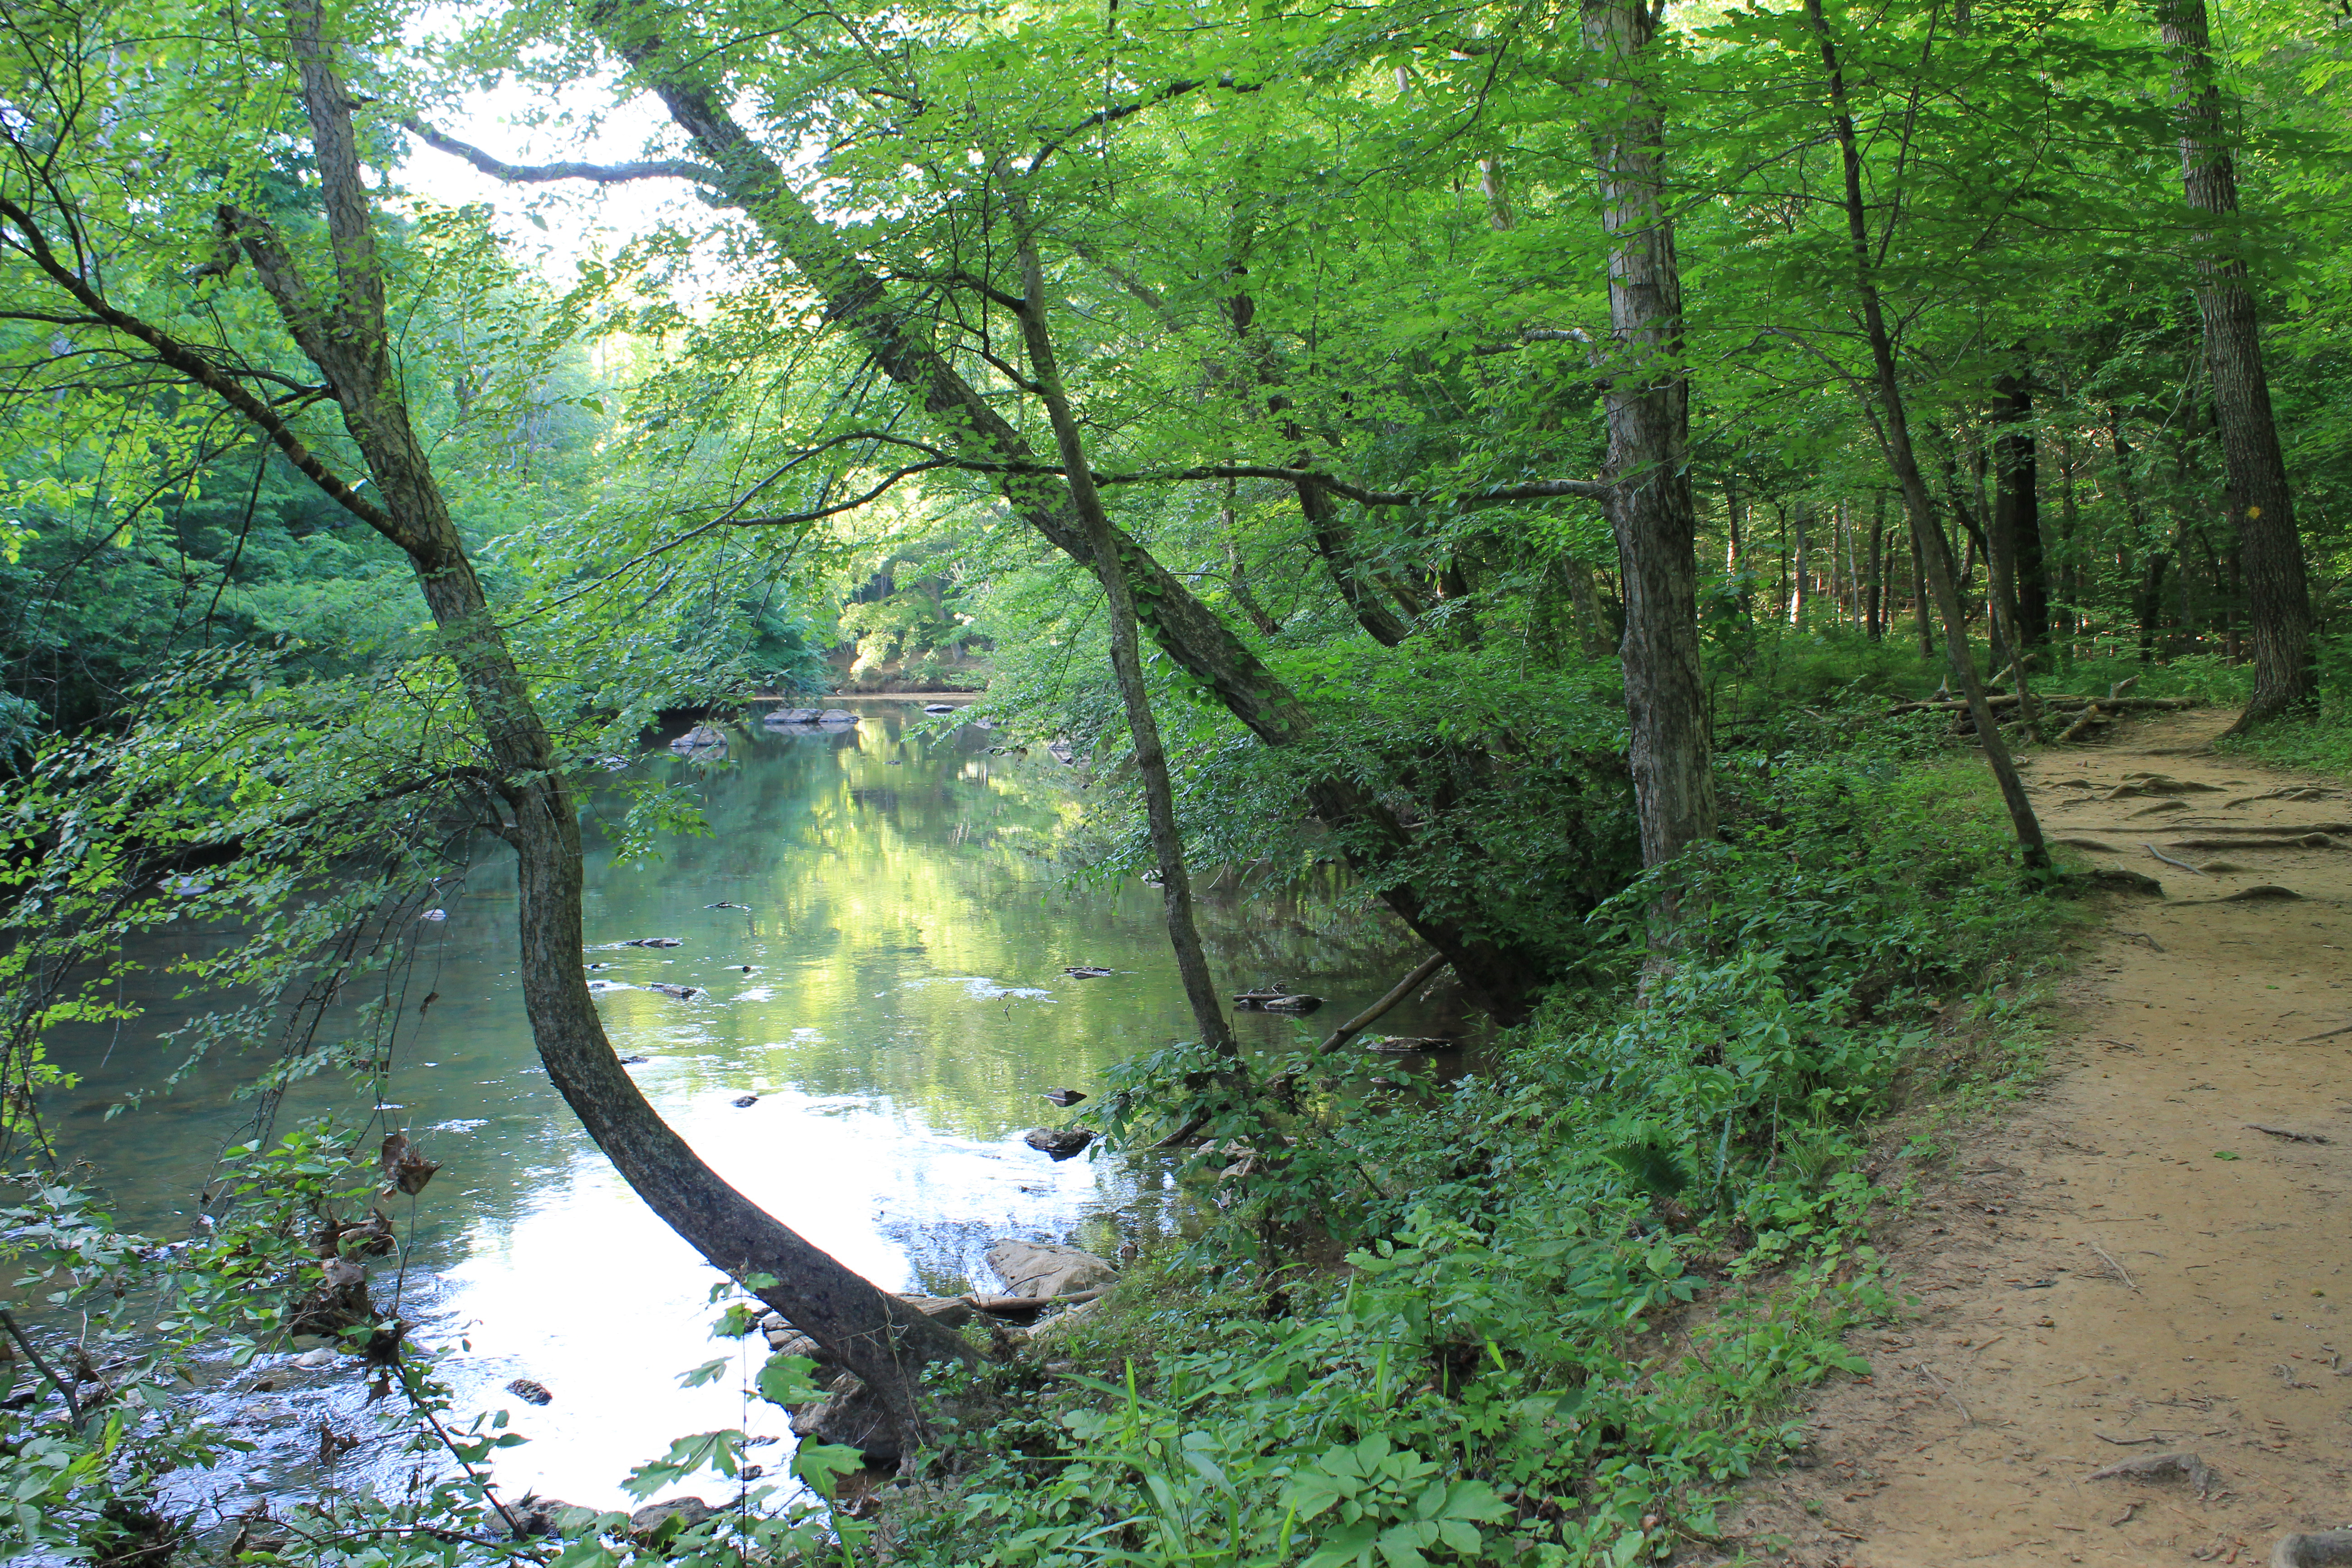 River walk by the Eno, thumbnail from portfolio website